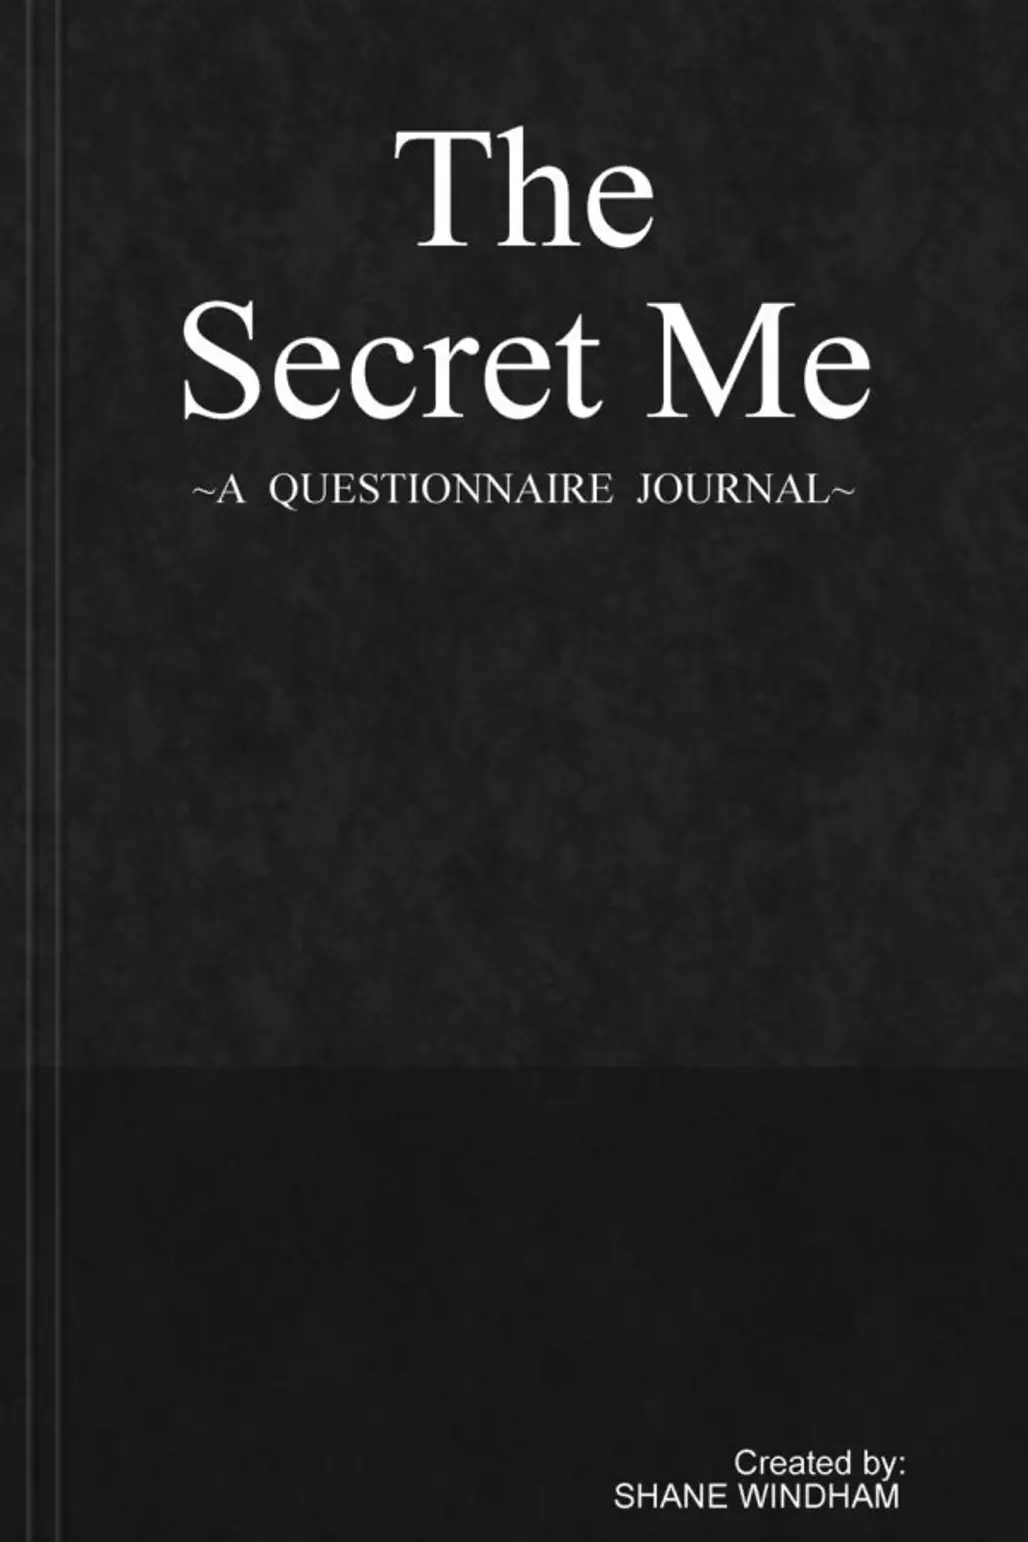 The Secret Me: a Questionnaire Journal by Shane Windham